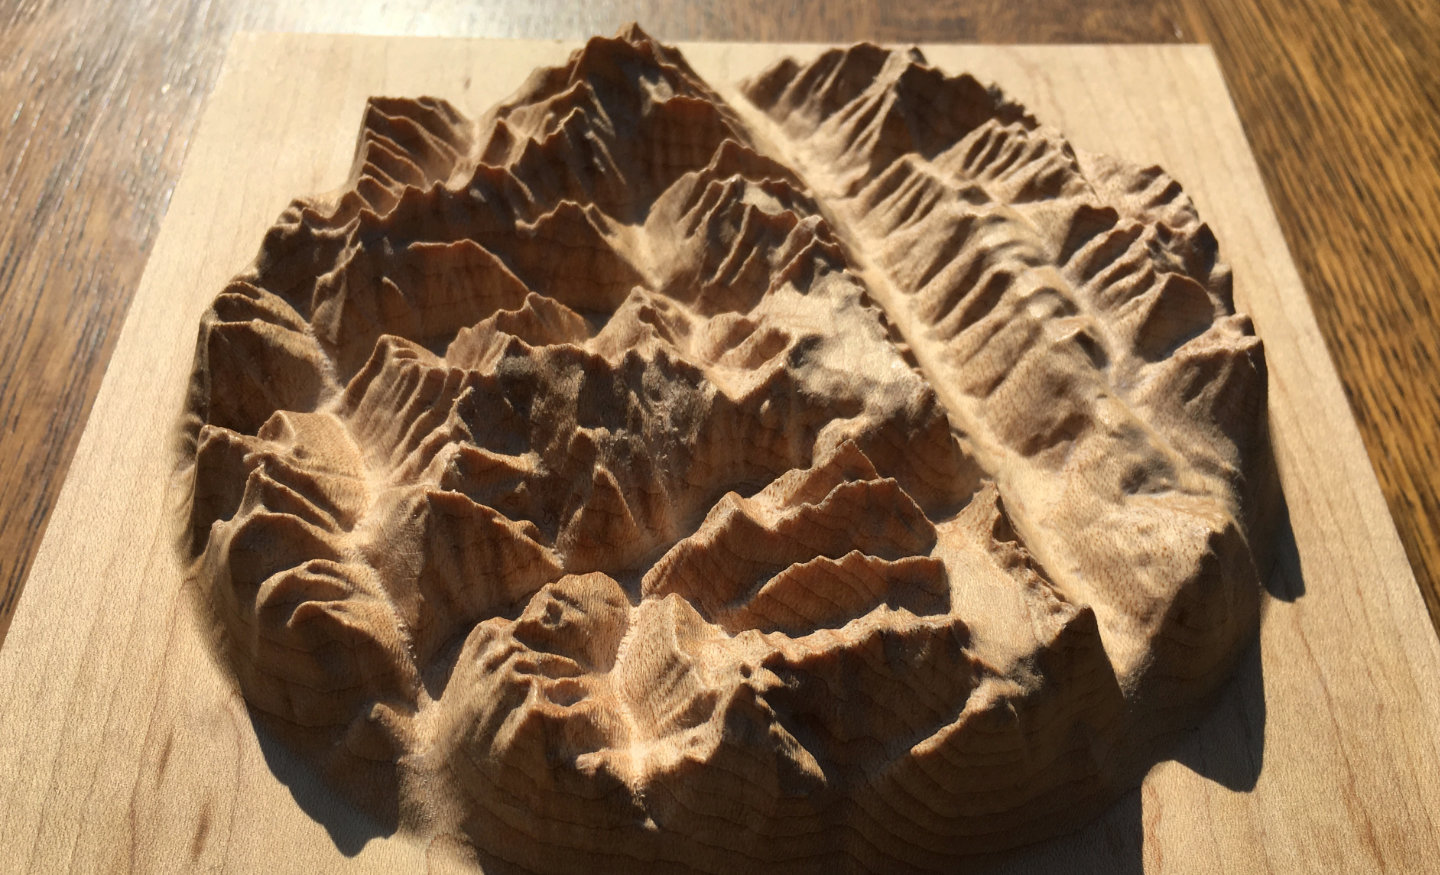 three-dimensional wood-carved relief map of the mountains around Rogers Pass in Glacier National Park, British Columbia, Canada